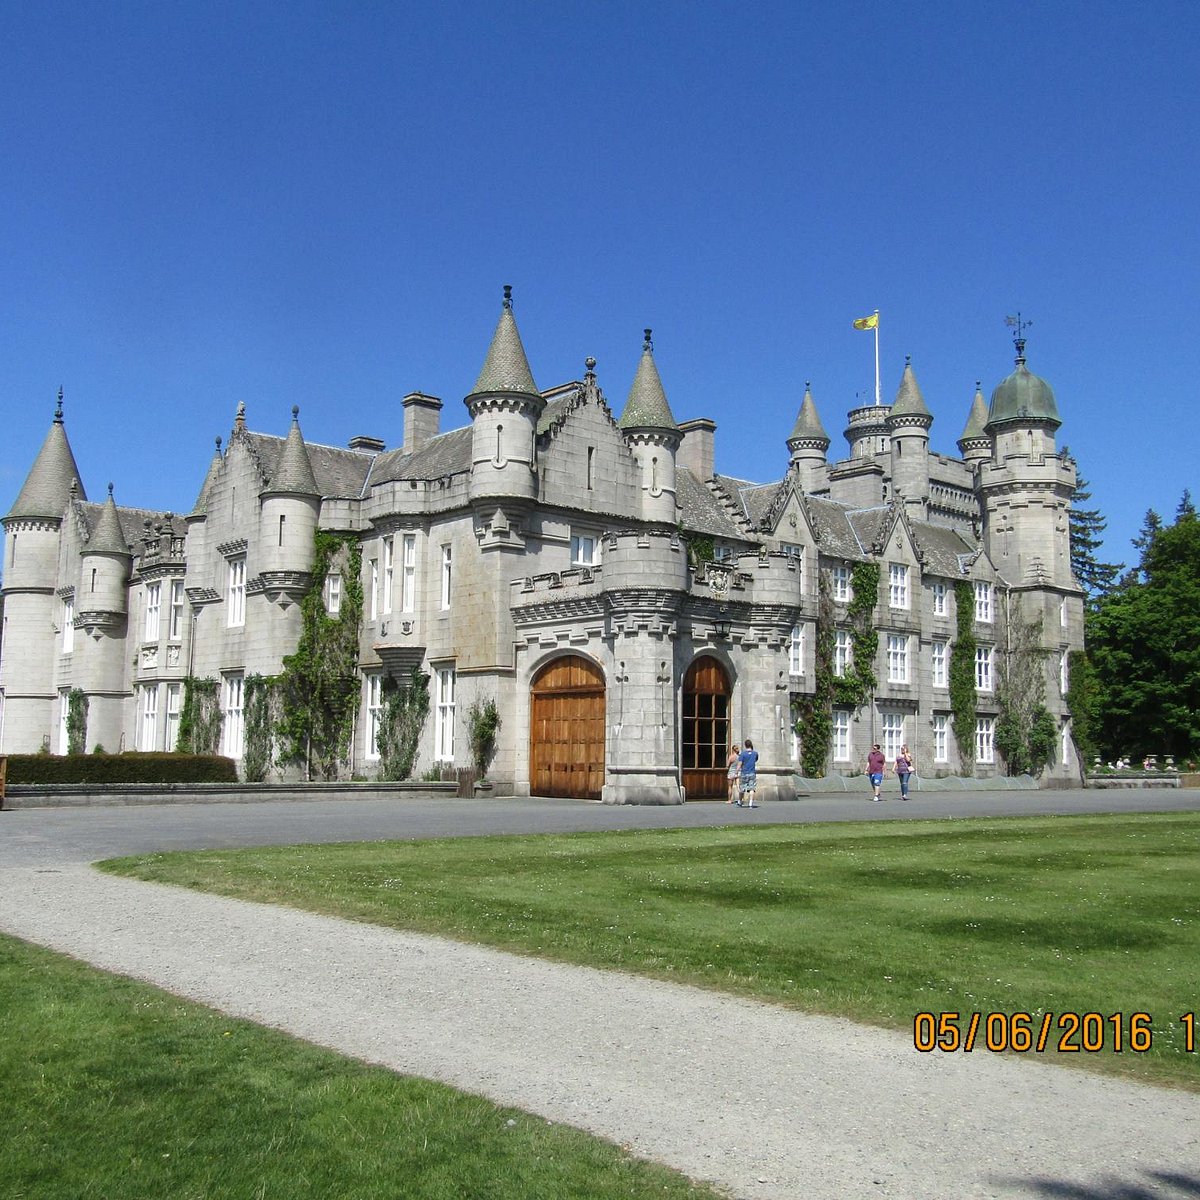 balmoral castle guided tour